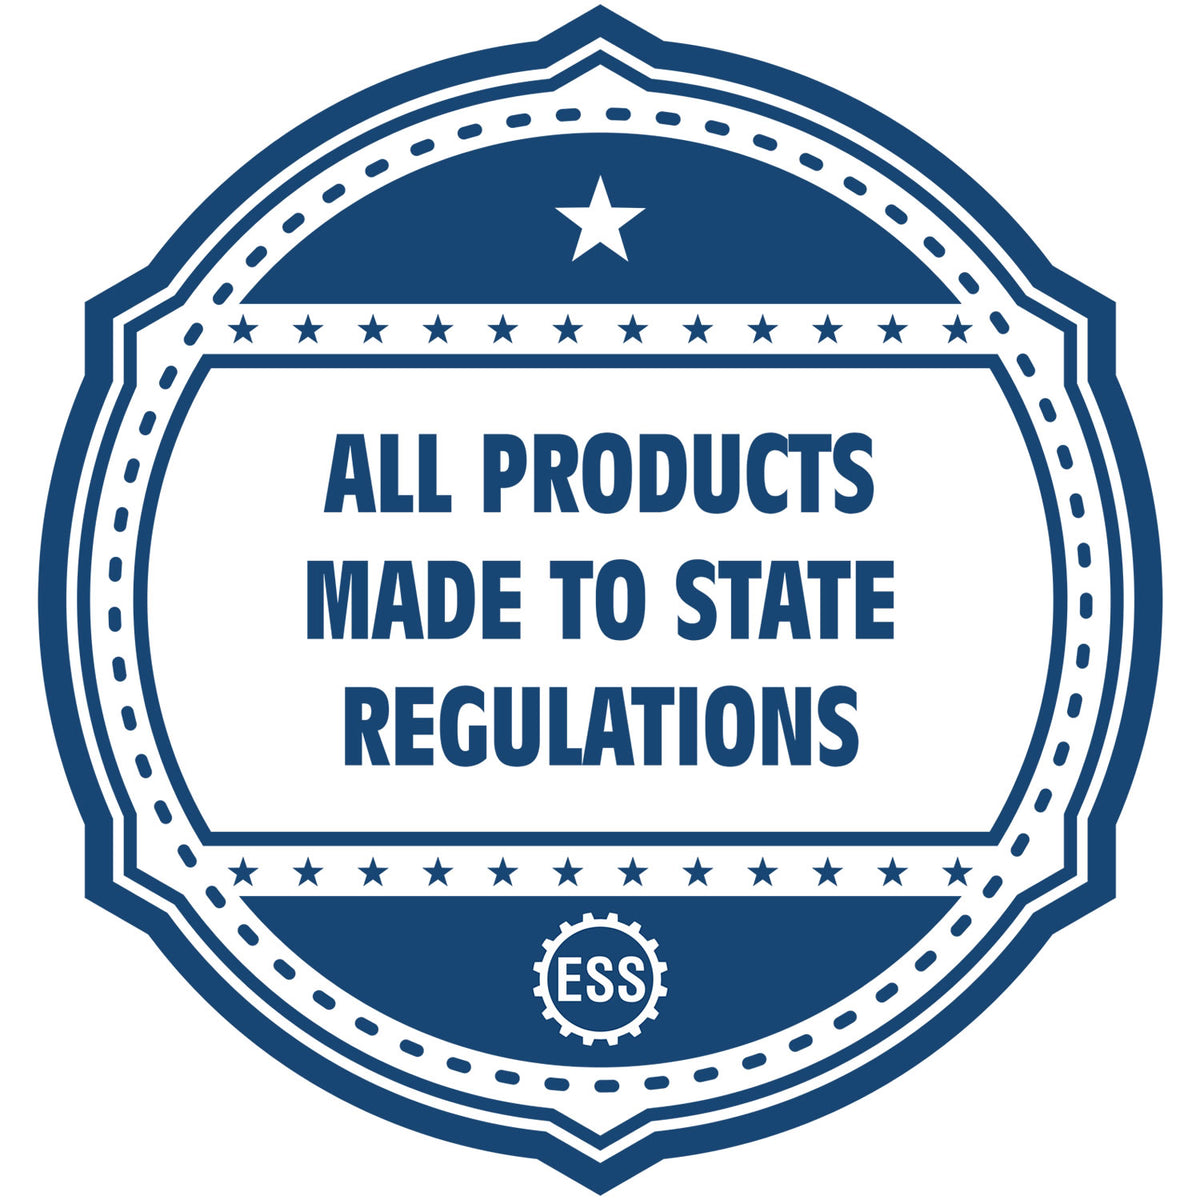 An icon or badge element for the Colorado Desk Architect Embossing Seal showing that this product is made in compliance with state regulations.